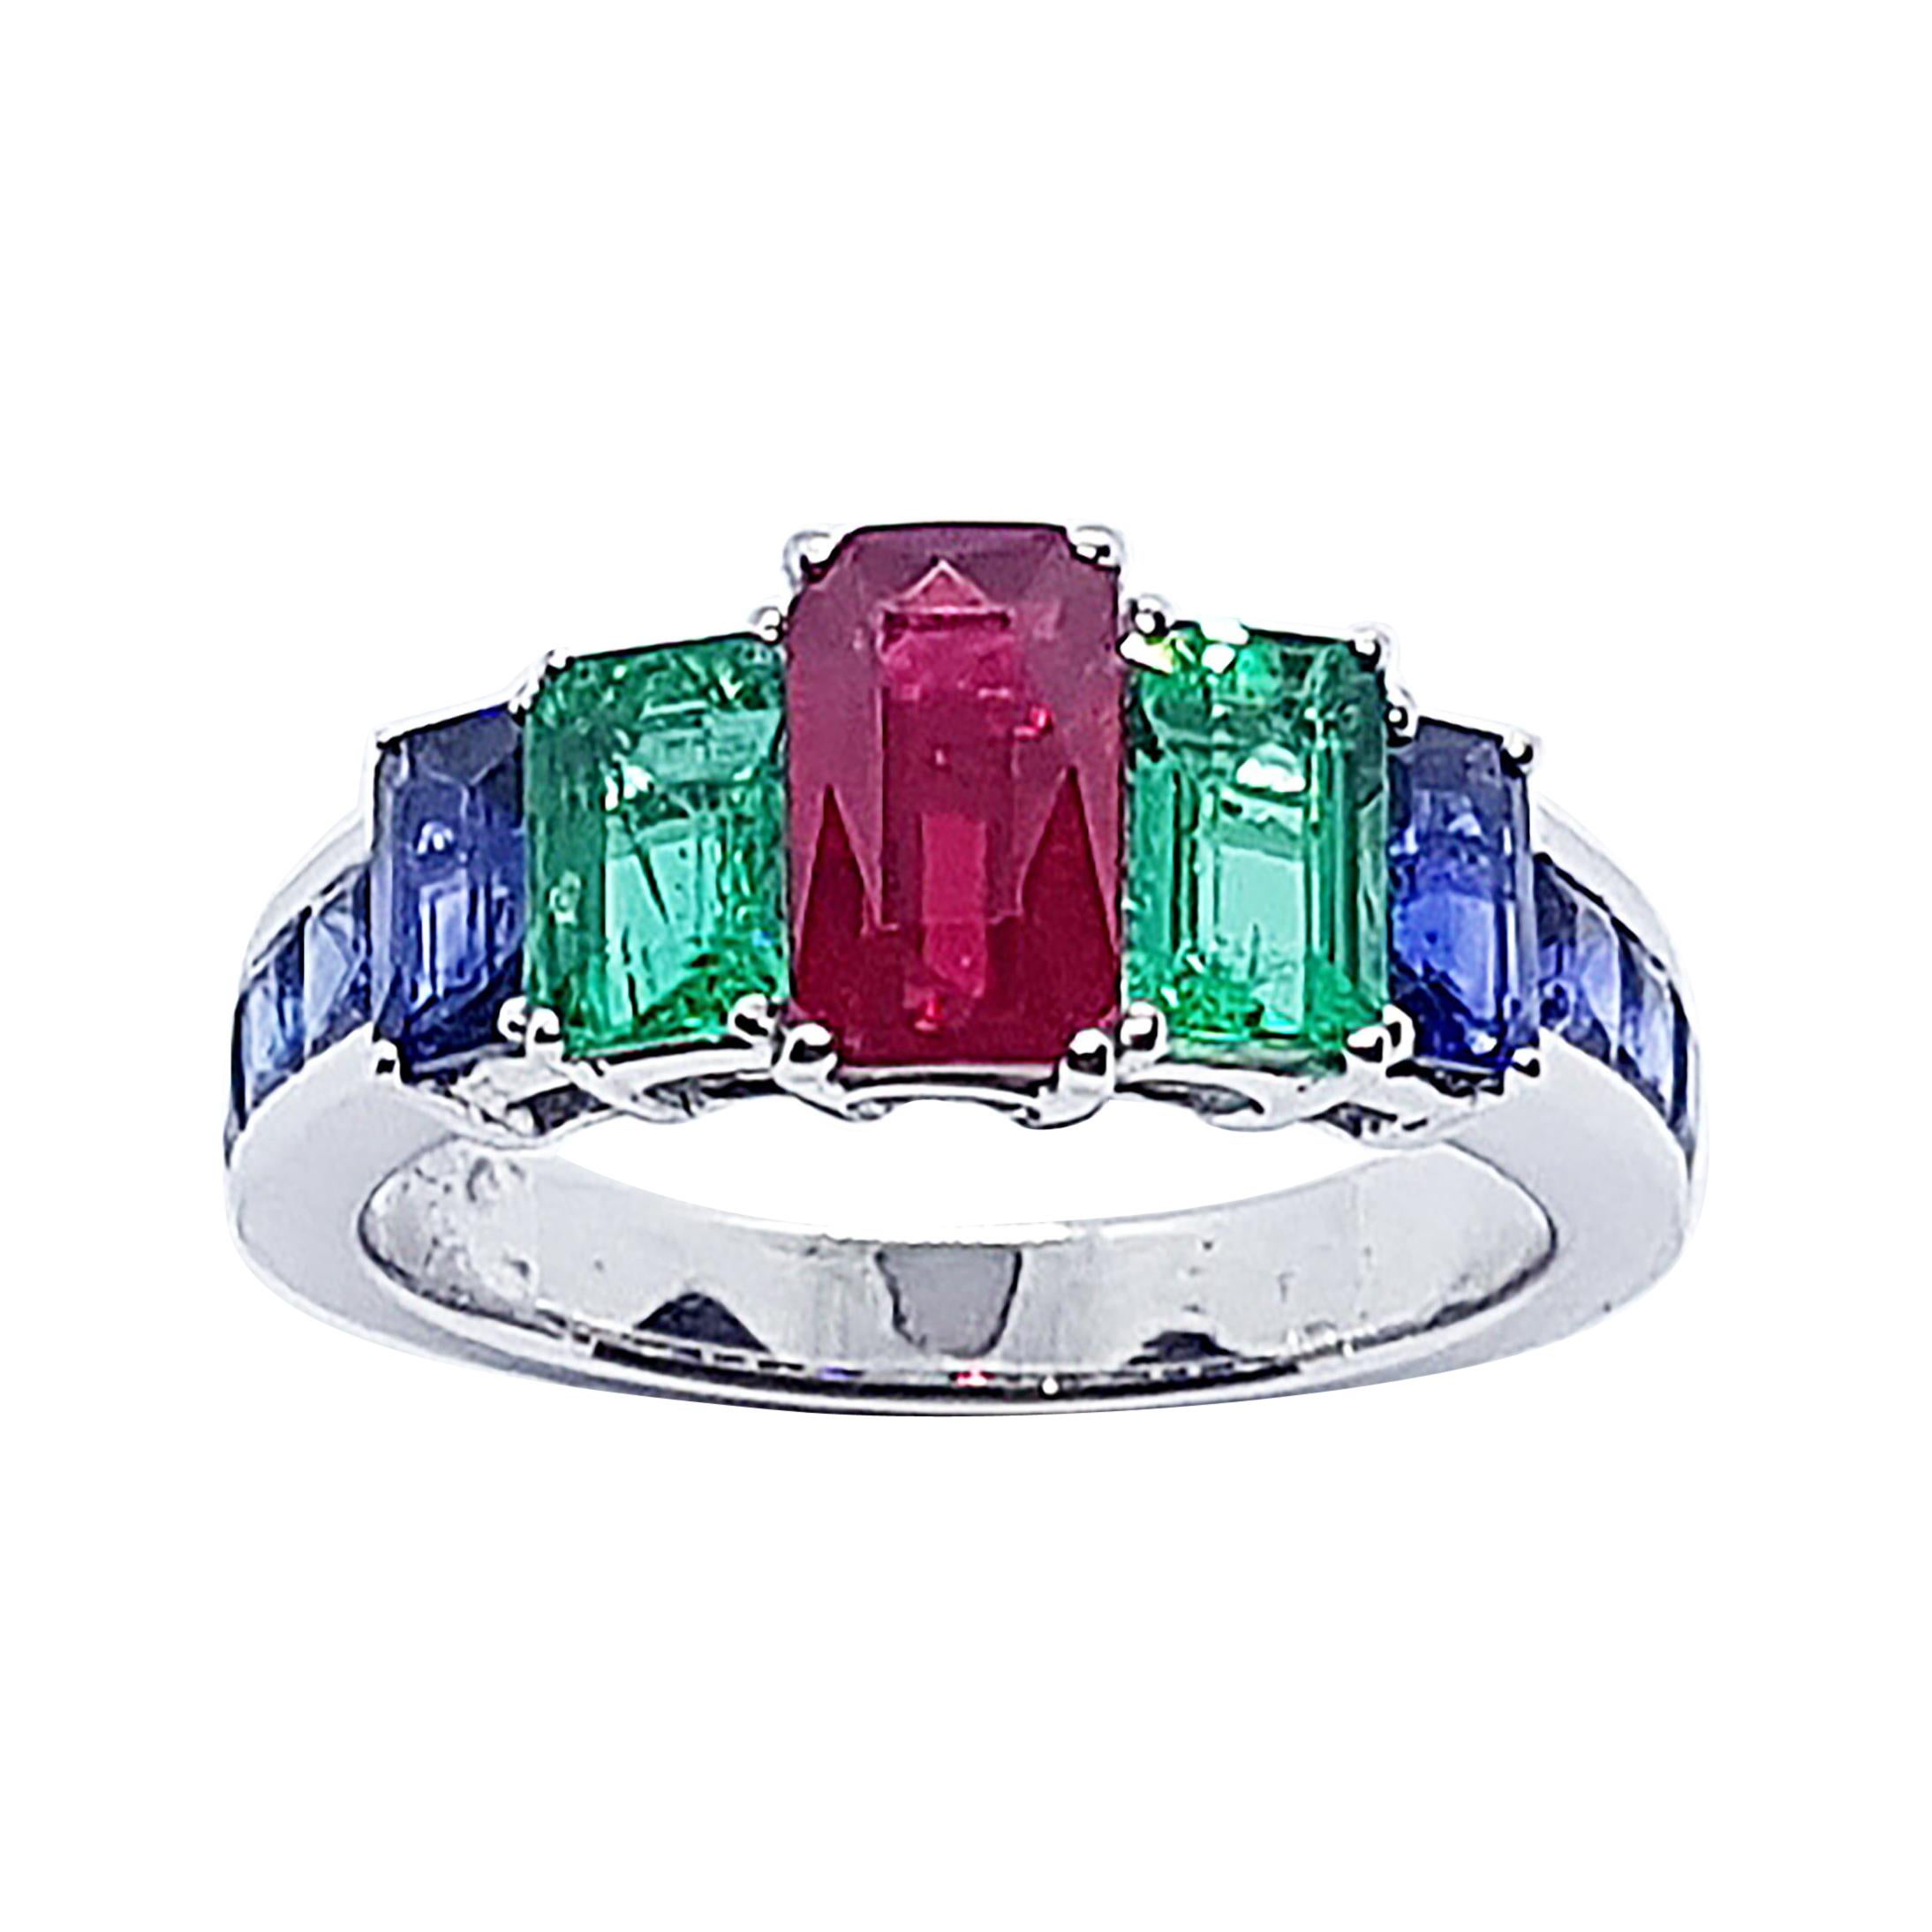 Ruby, Emerald and Blue Sapphire Ring Set in 18 Karat White Gold Settings